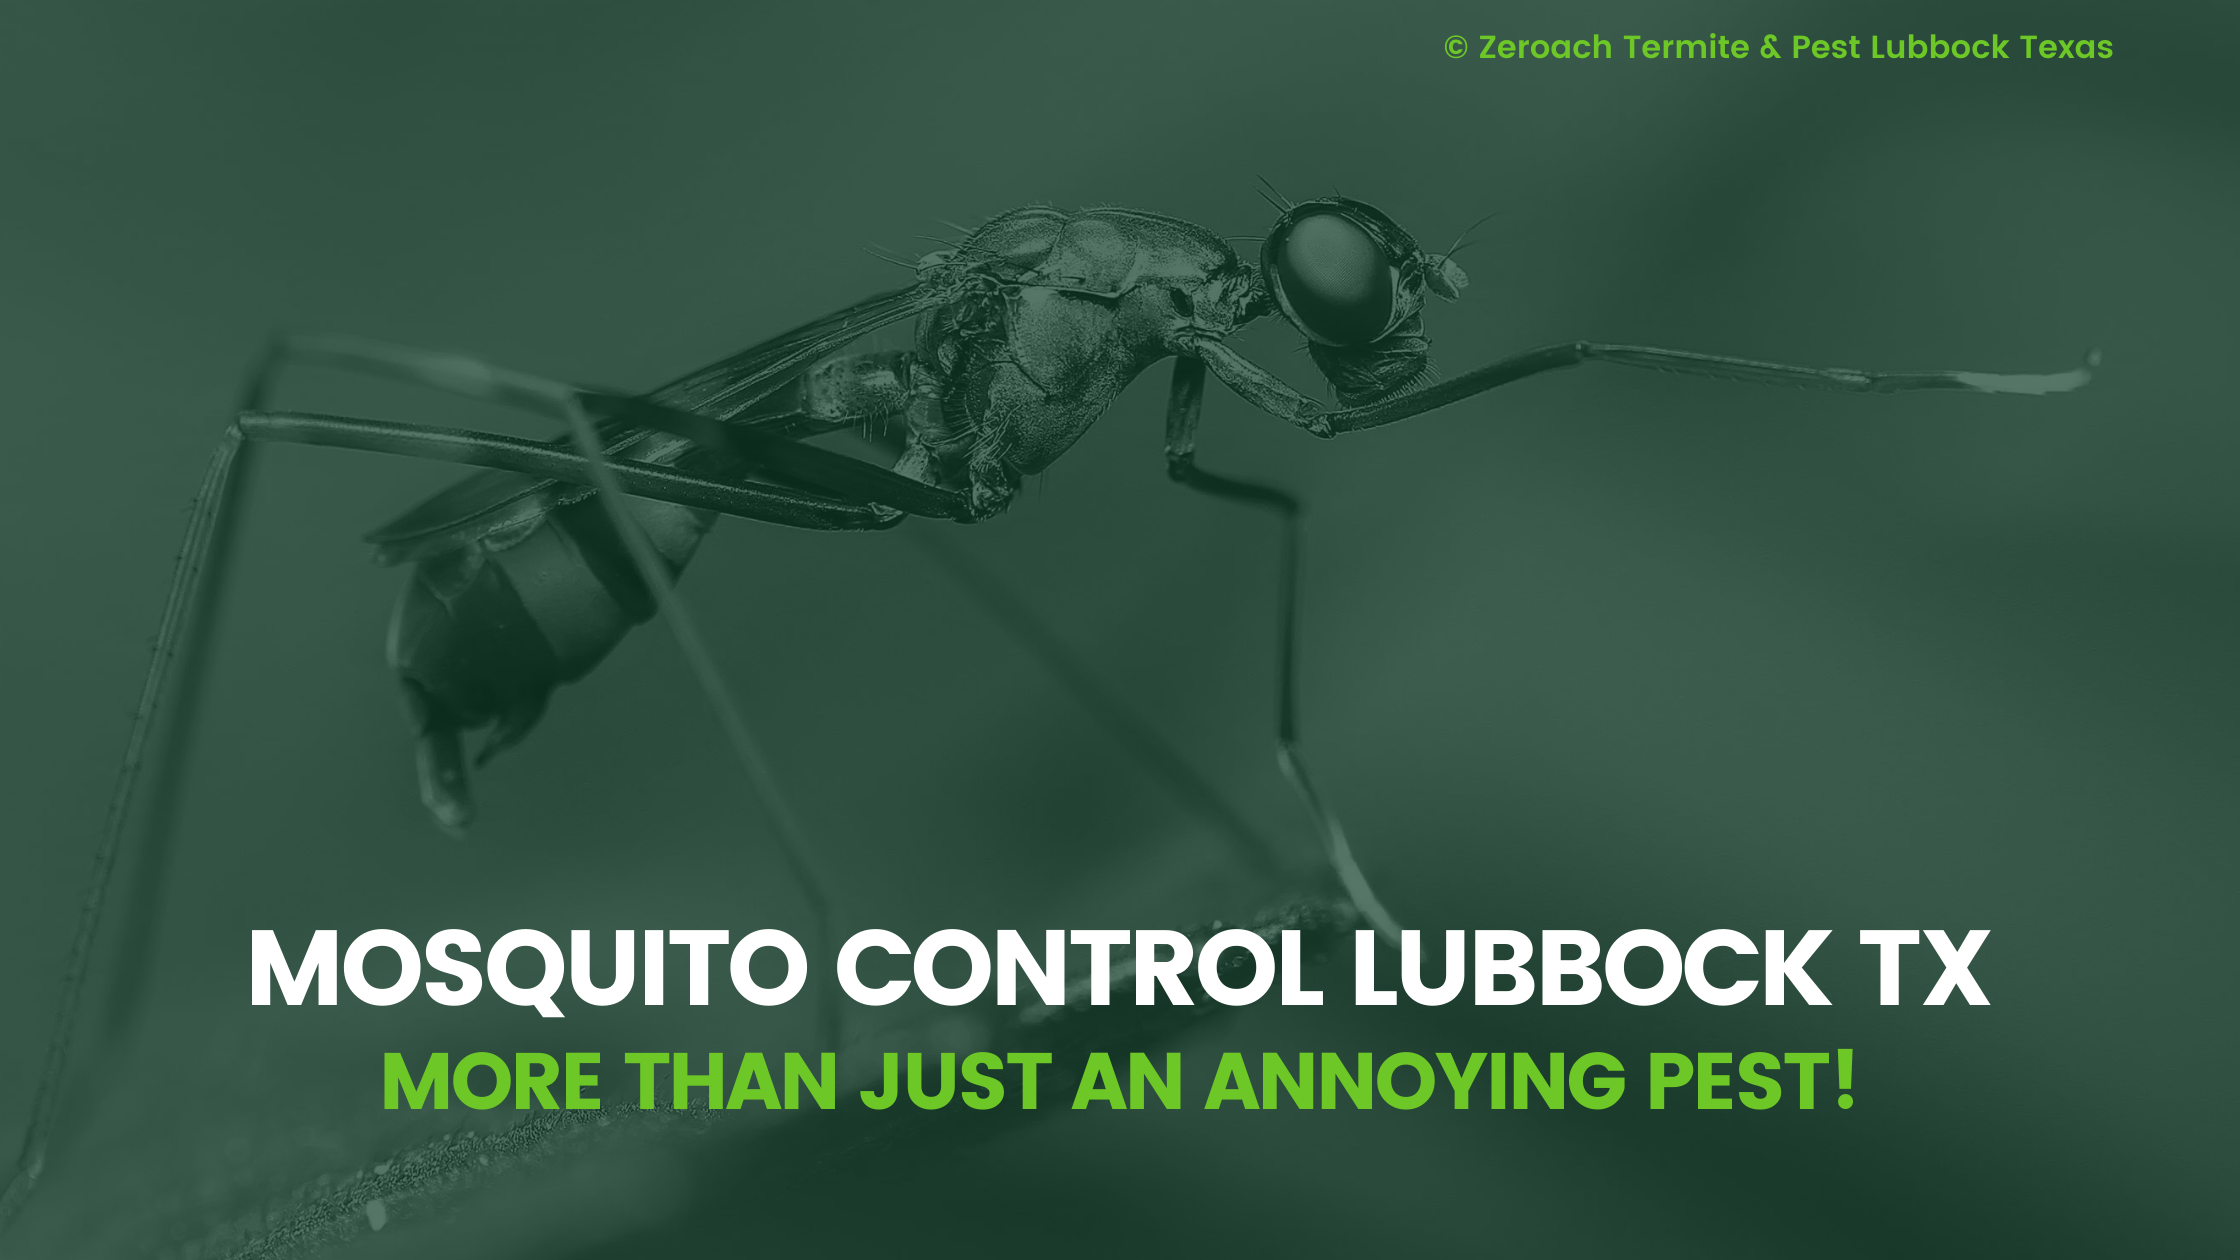 Mosquito Control Lubbock TX: More Than Just An Annoying Pest!